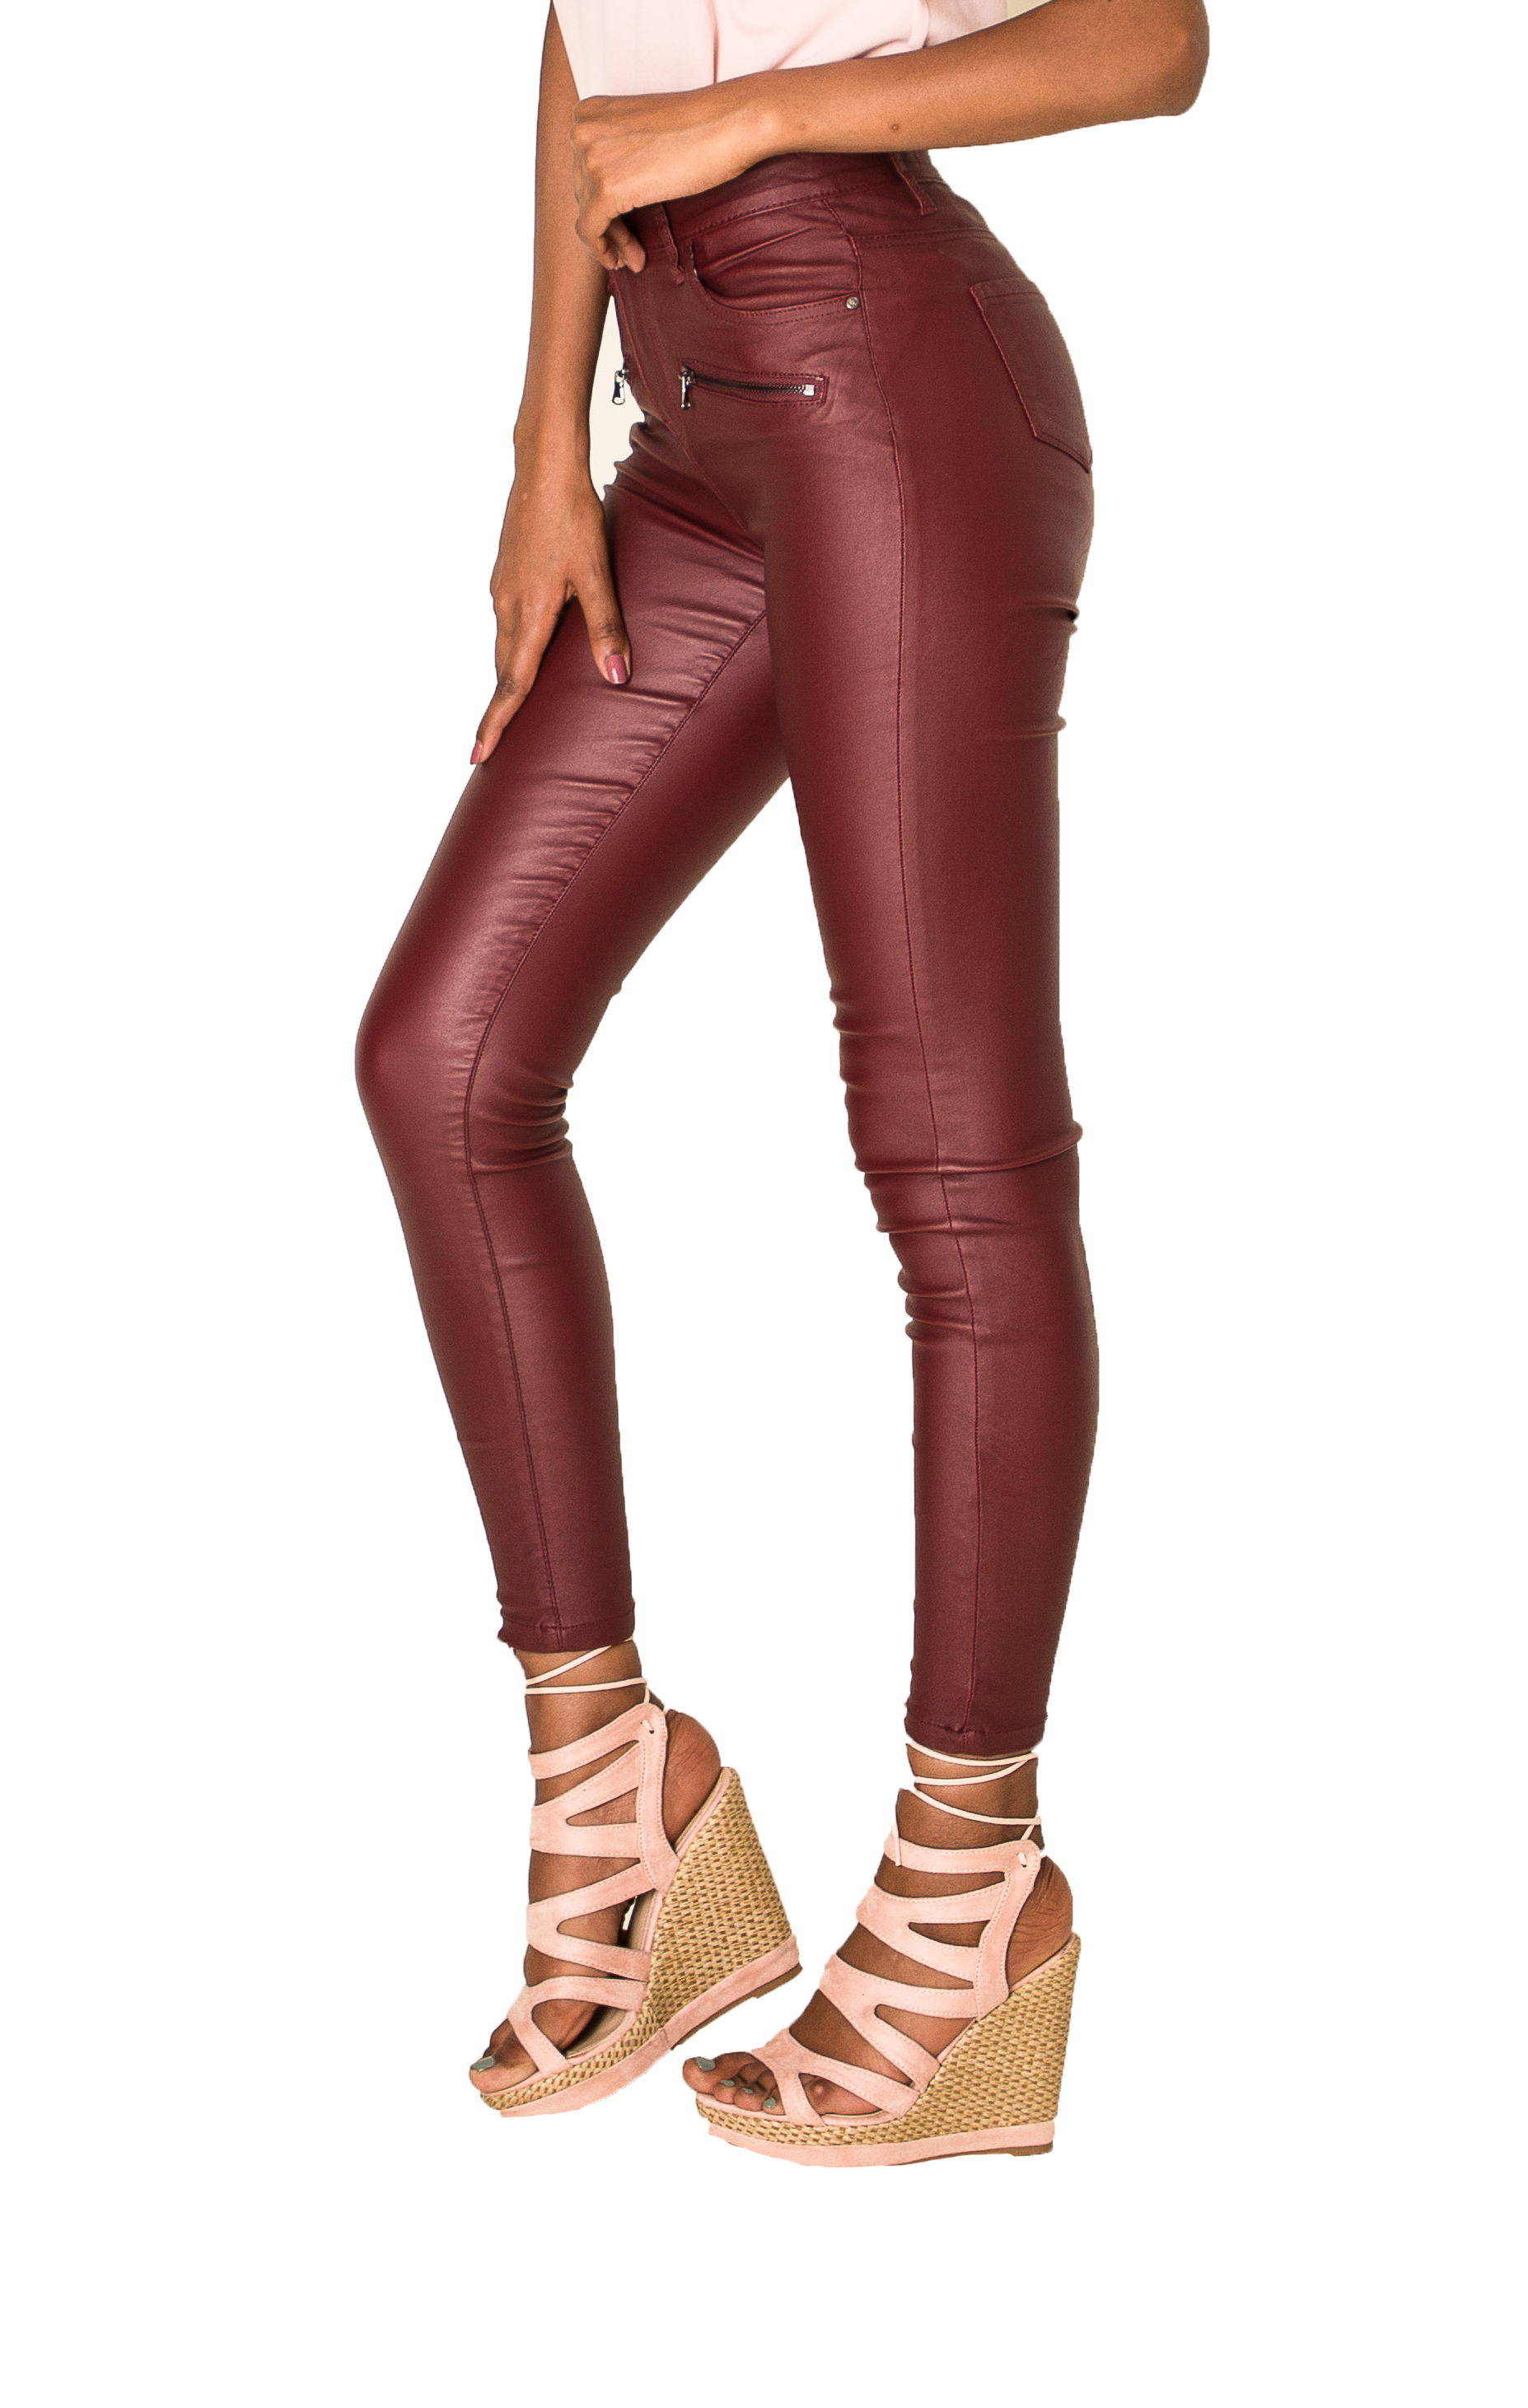 Stretch Leather Leggings Womens Leather 4243